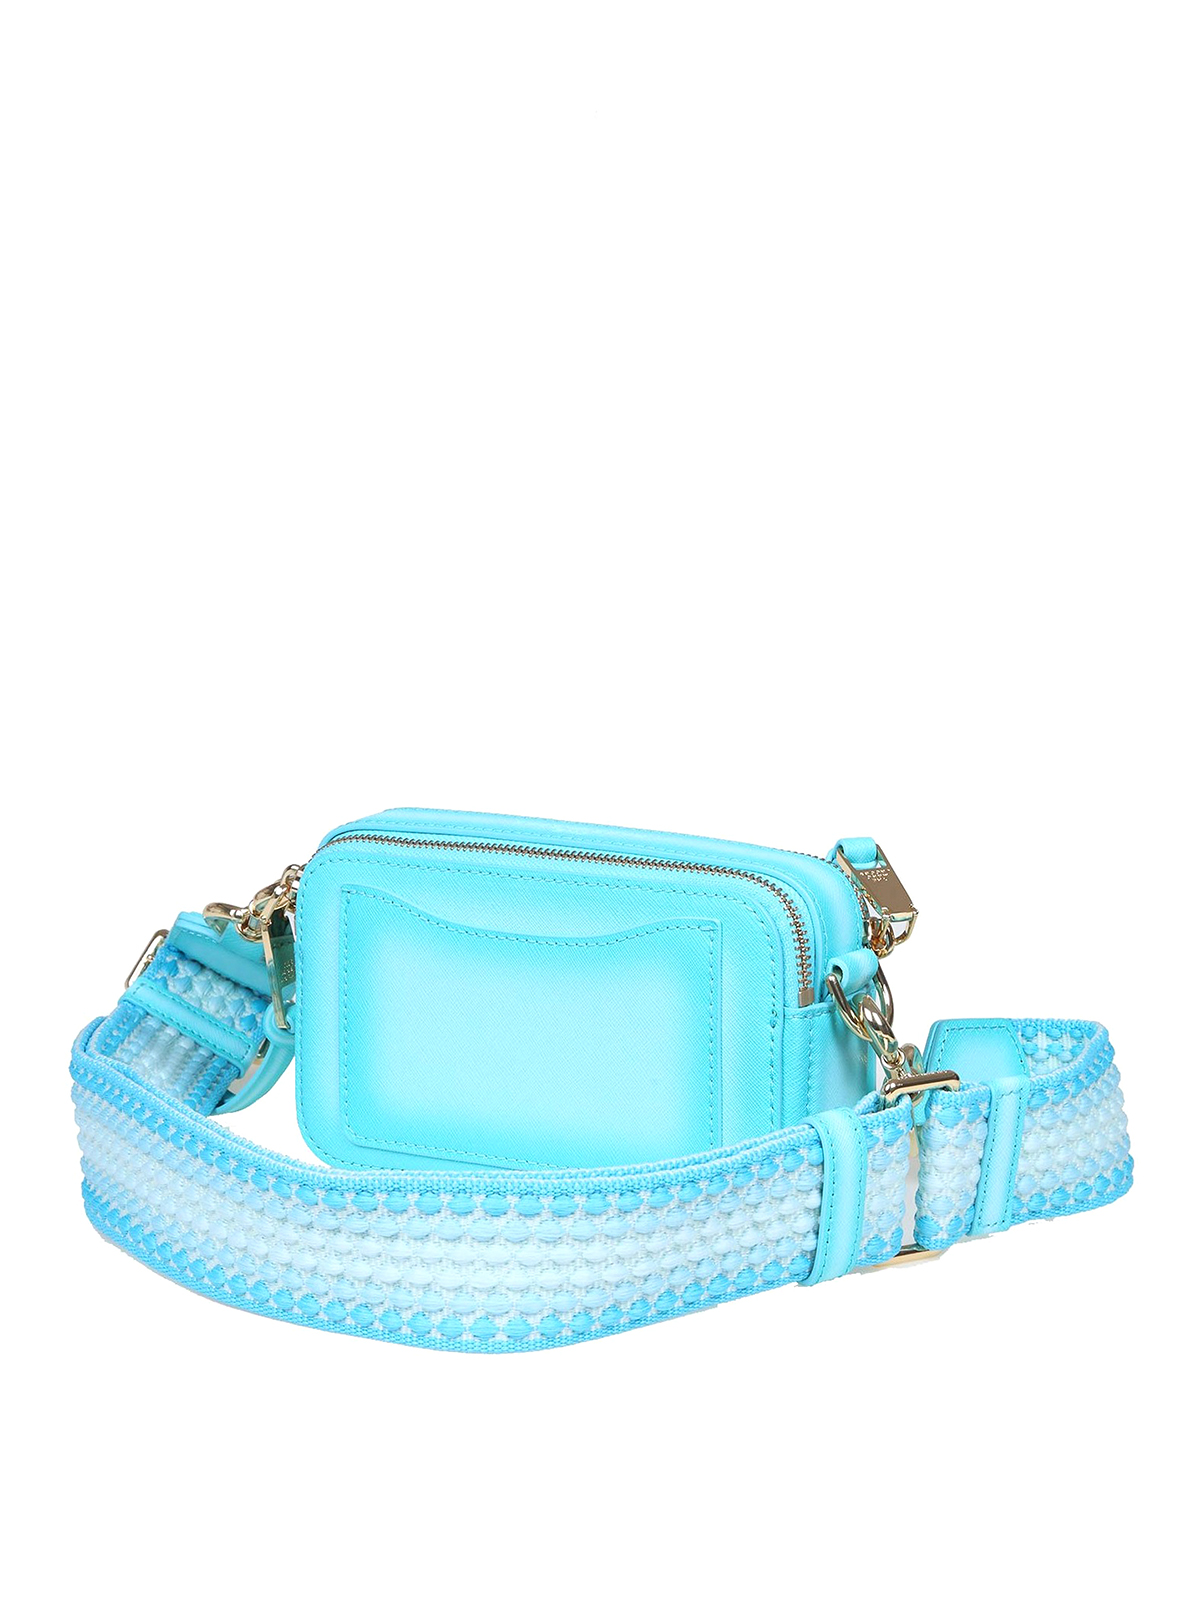 Marc Jacobs Snapshot camera bag Blue Leather Pony-style calfskin